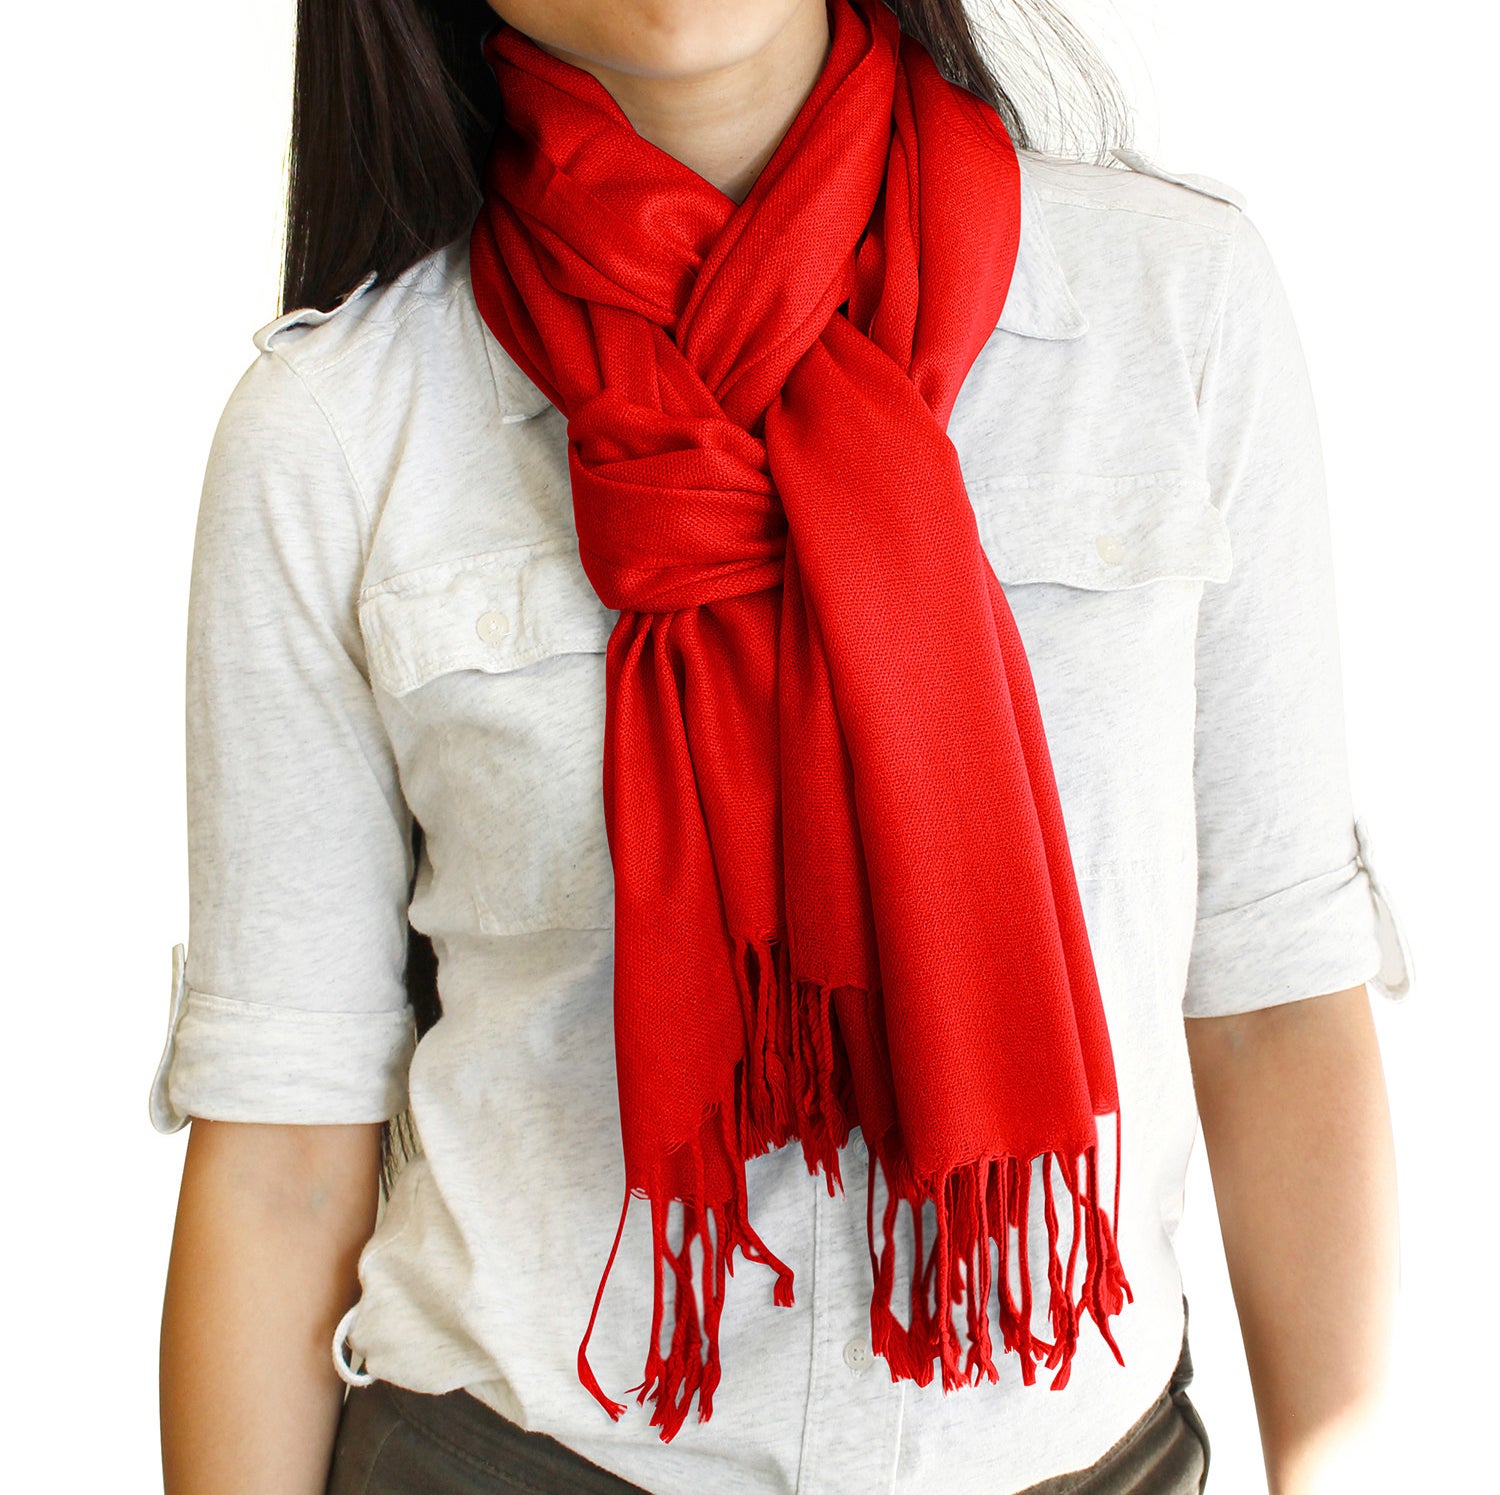 Model wearing a bright red scarf